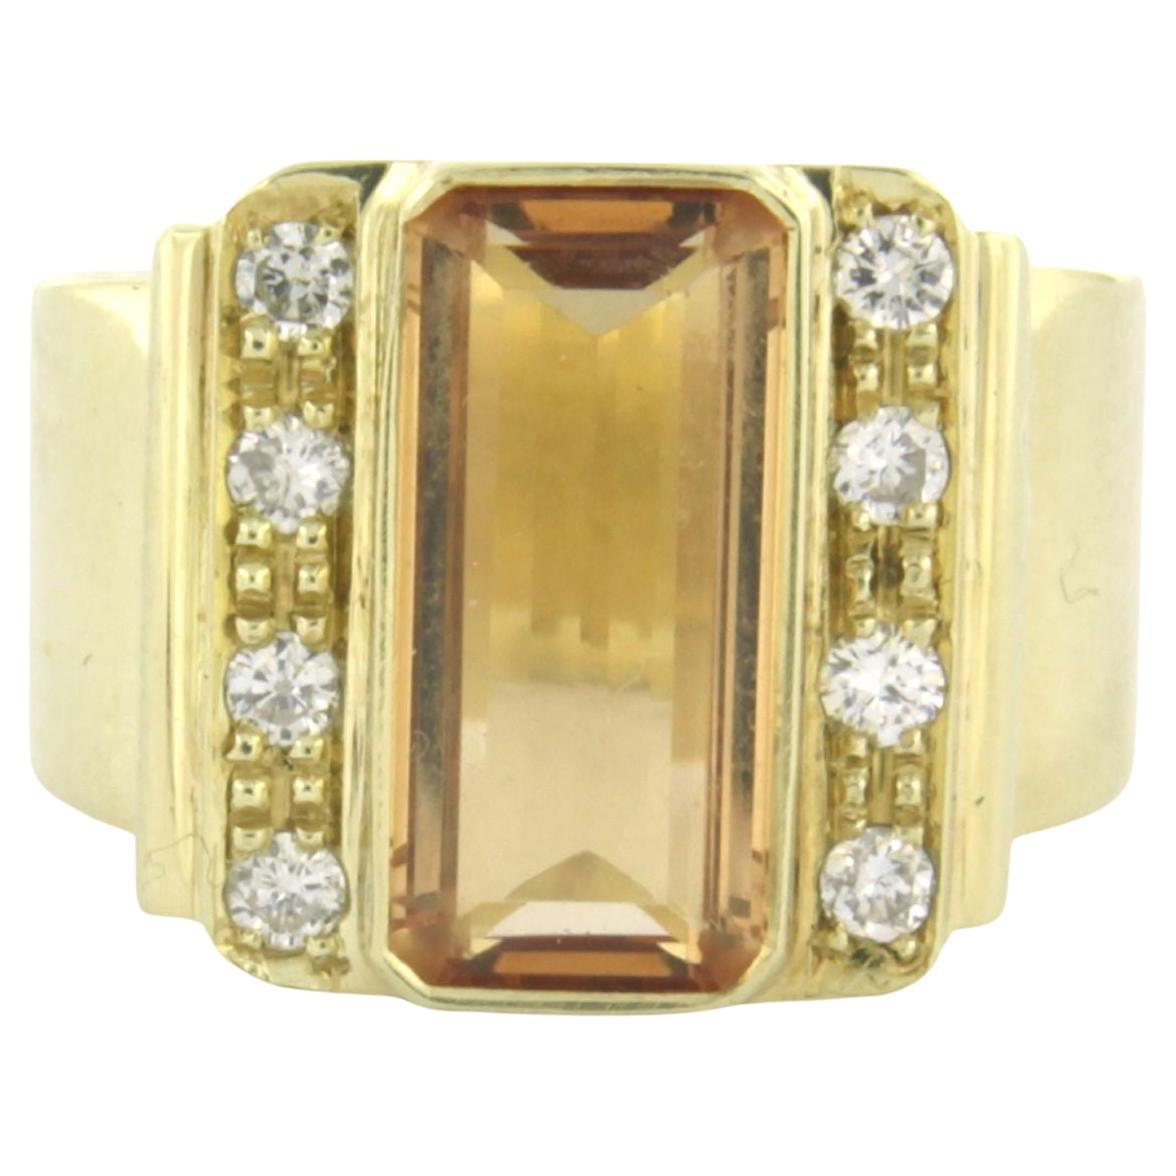 Ring with citrine and diamonds 14k yellow gold